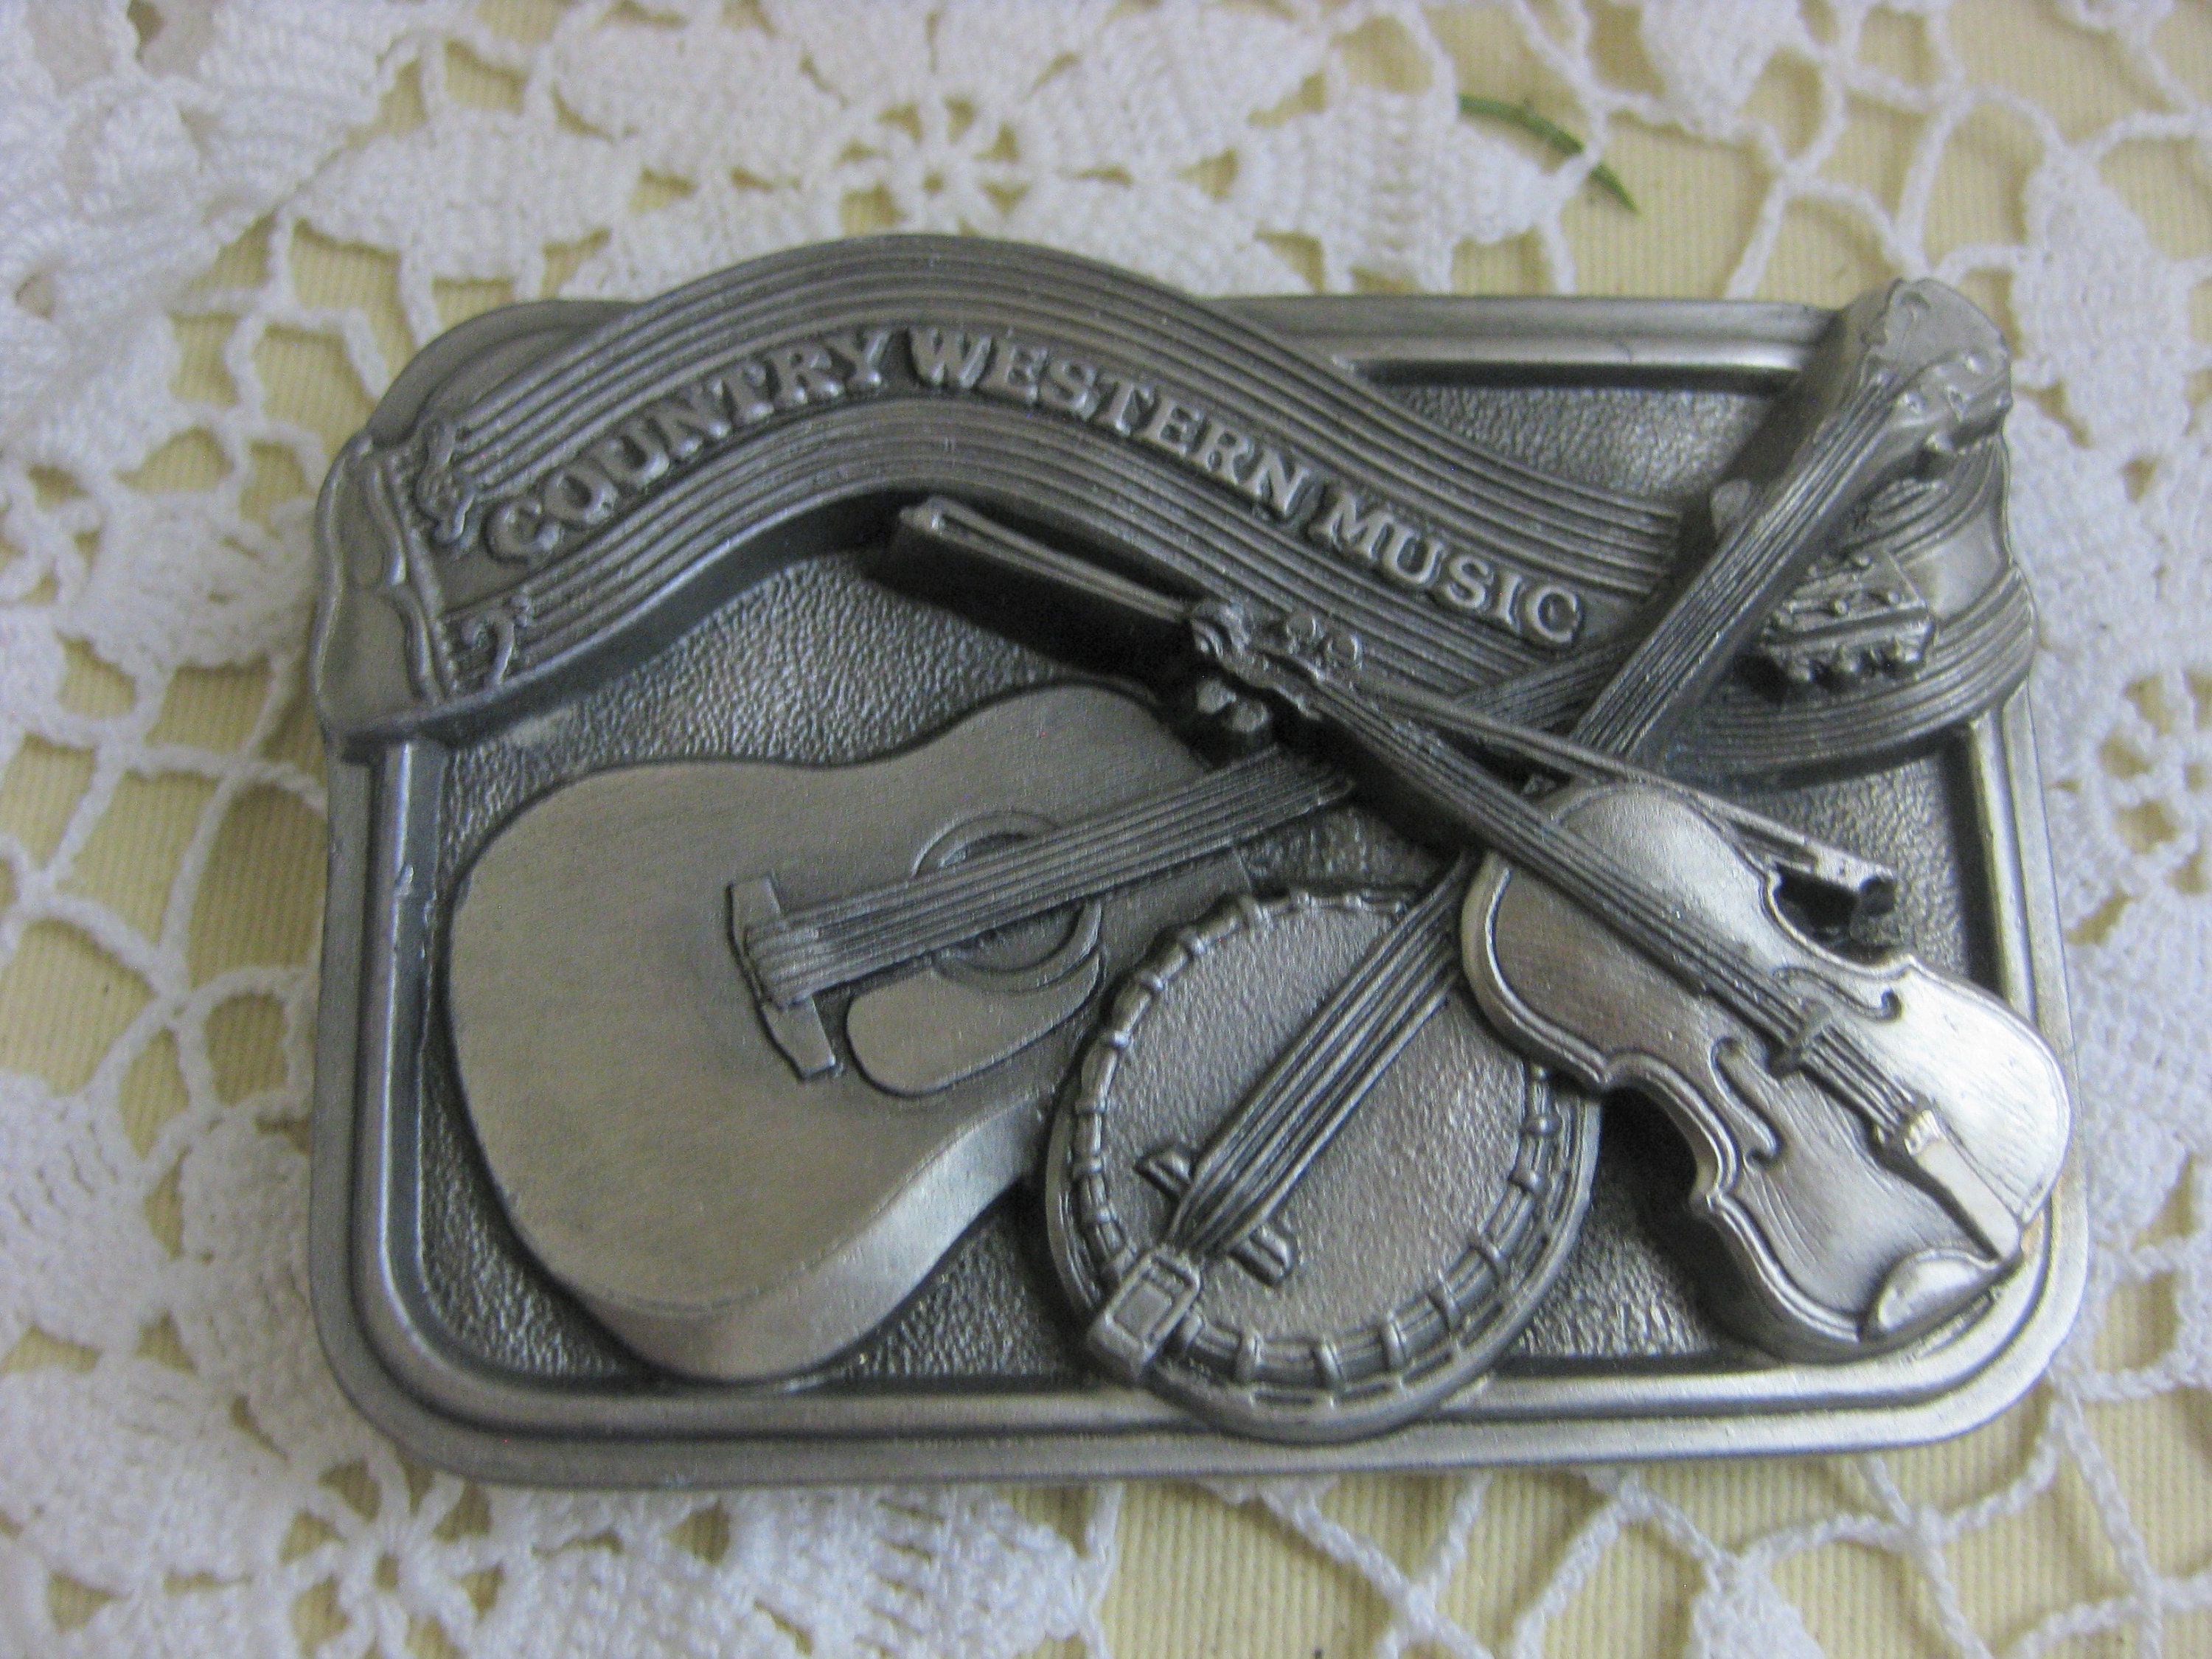 Vintage Country Western Music Belt Buckle 1984 Bergamot Brass picture image